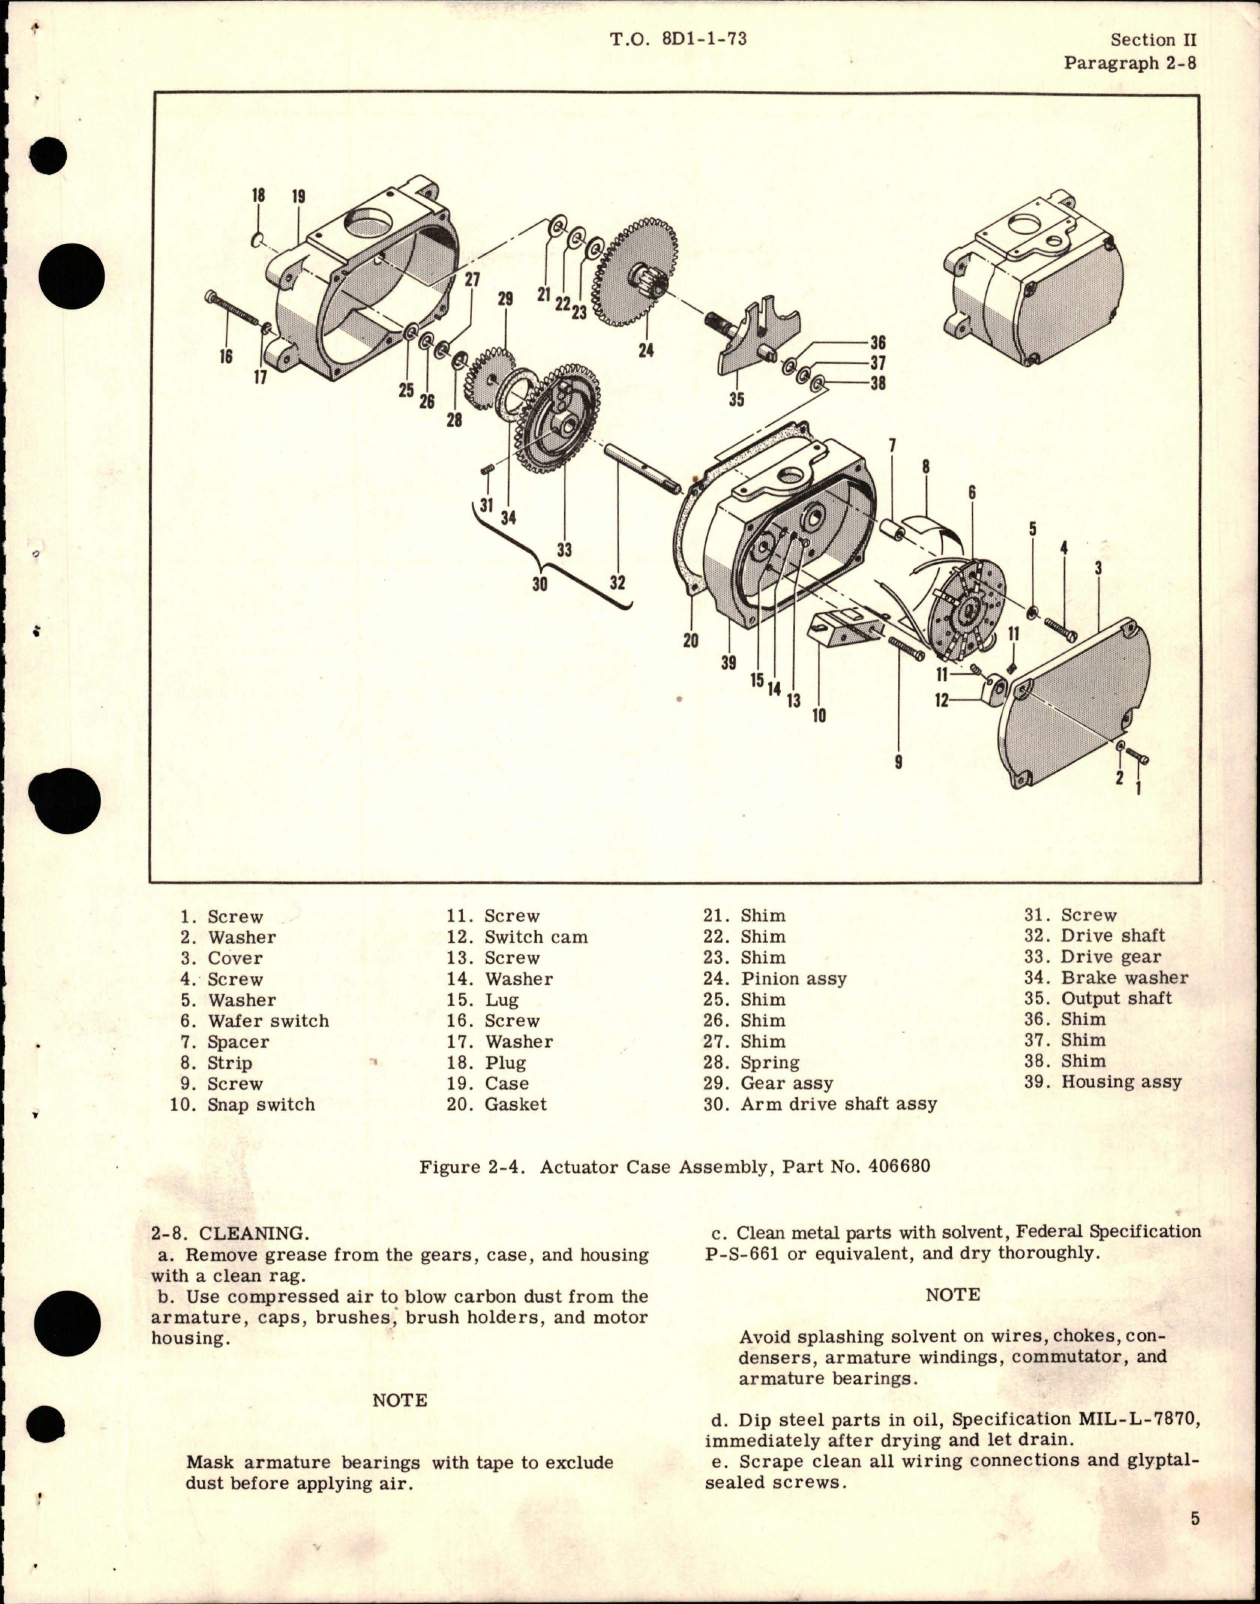 Sample page 7 from AirCorps Library document: Overhaul Instructions for Geneva-Loc Actuators - Series 108